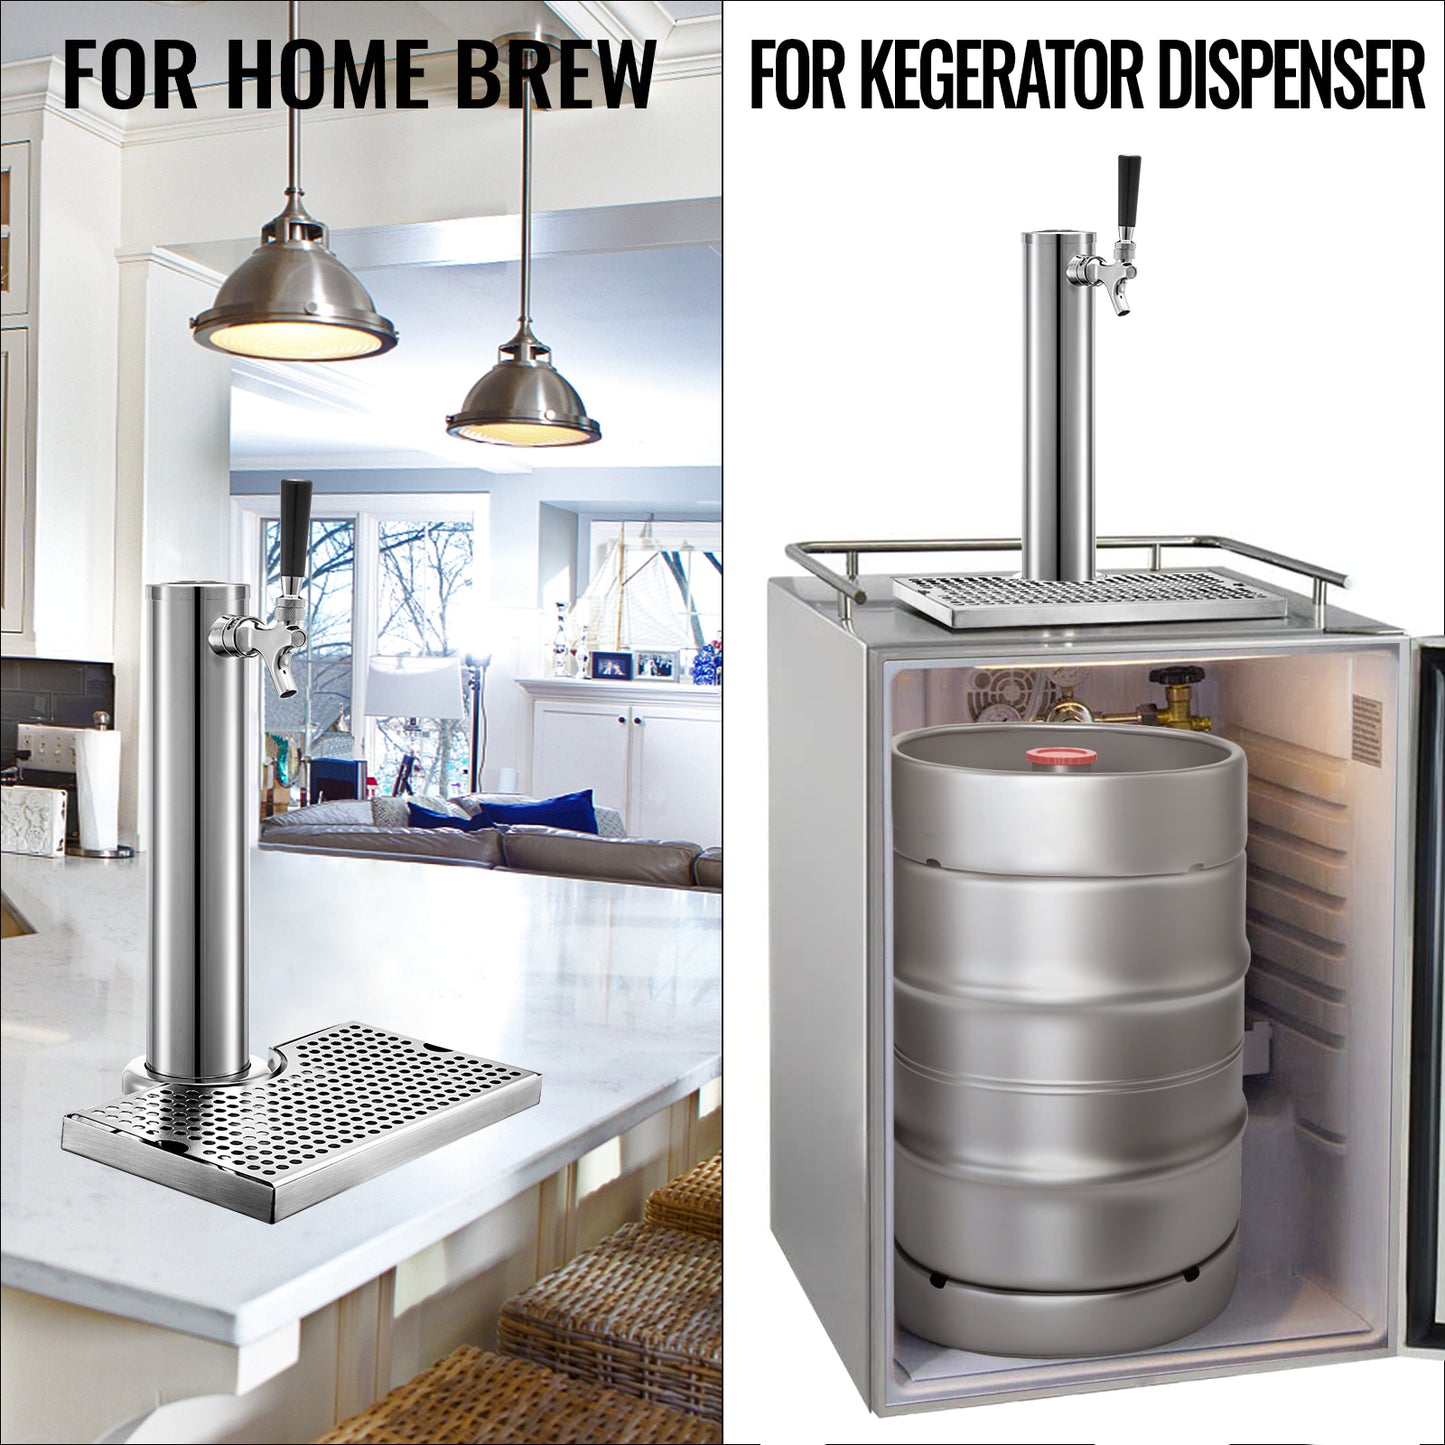 Stainless Single Tap Beer Tower Dispenser with Drip Tray (Homebrew)